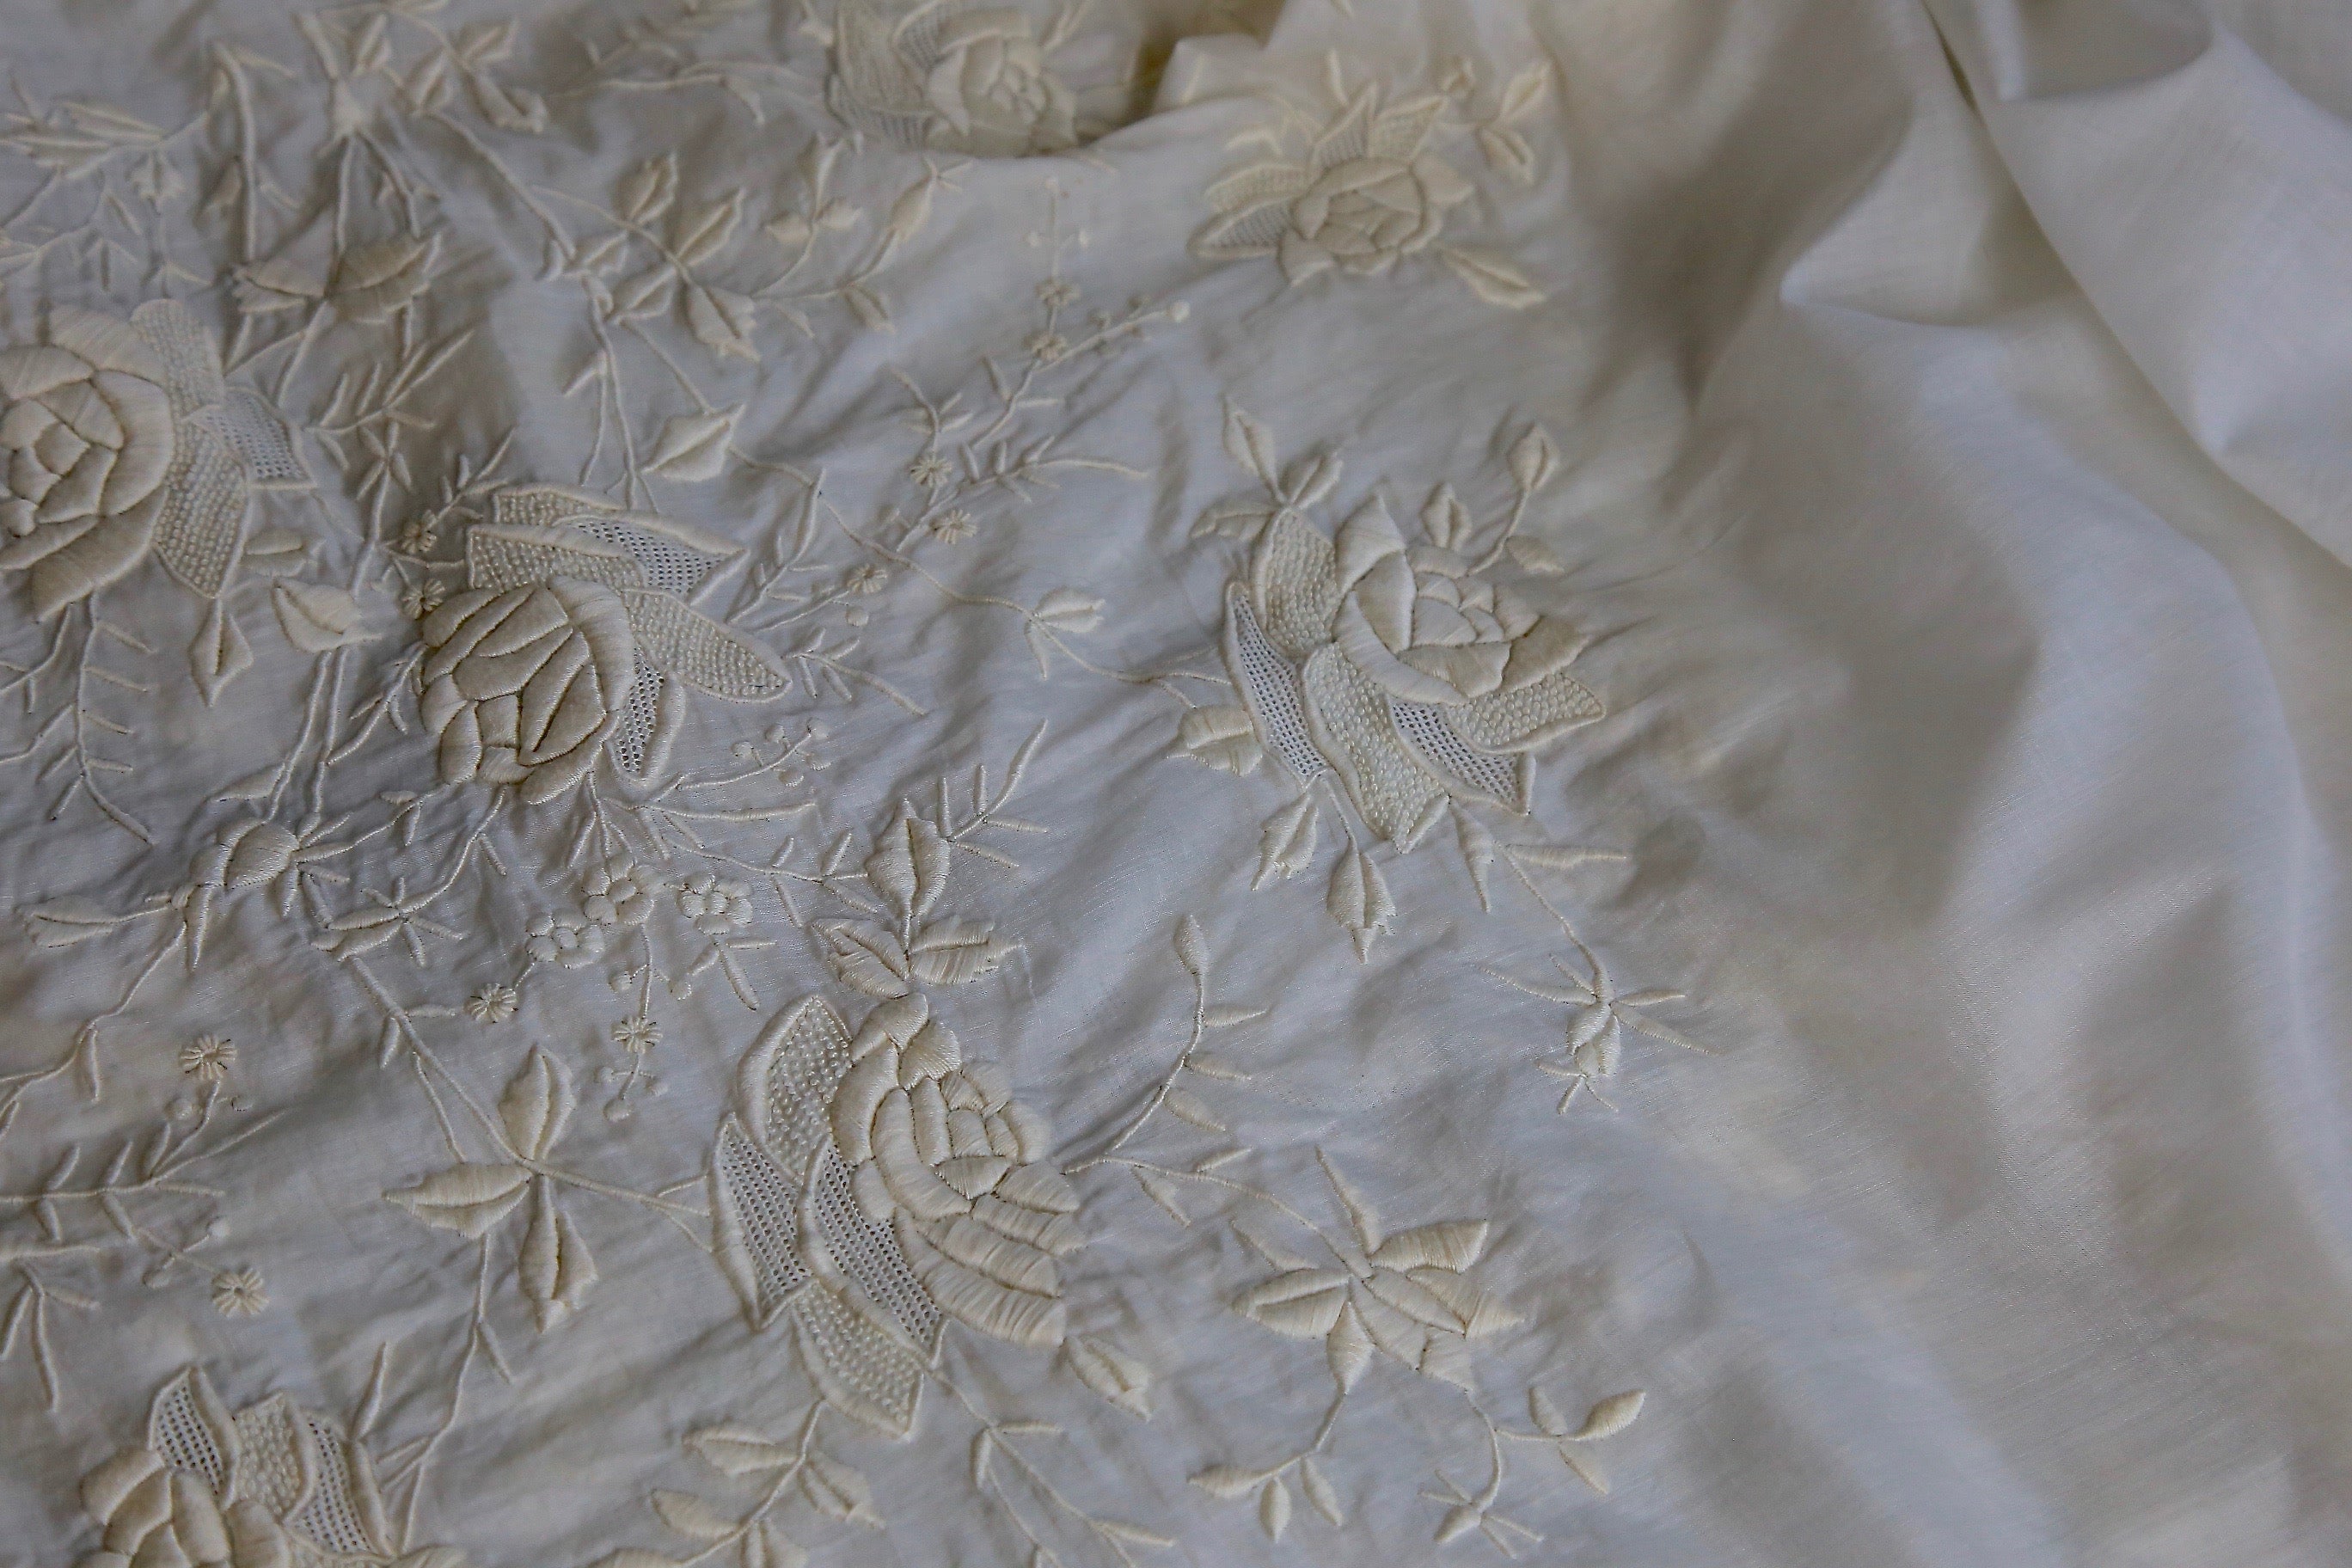 Antique Victorian 1890s sheer cotton lawn floral embroidered tea gown fabric 5 yards